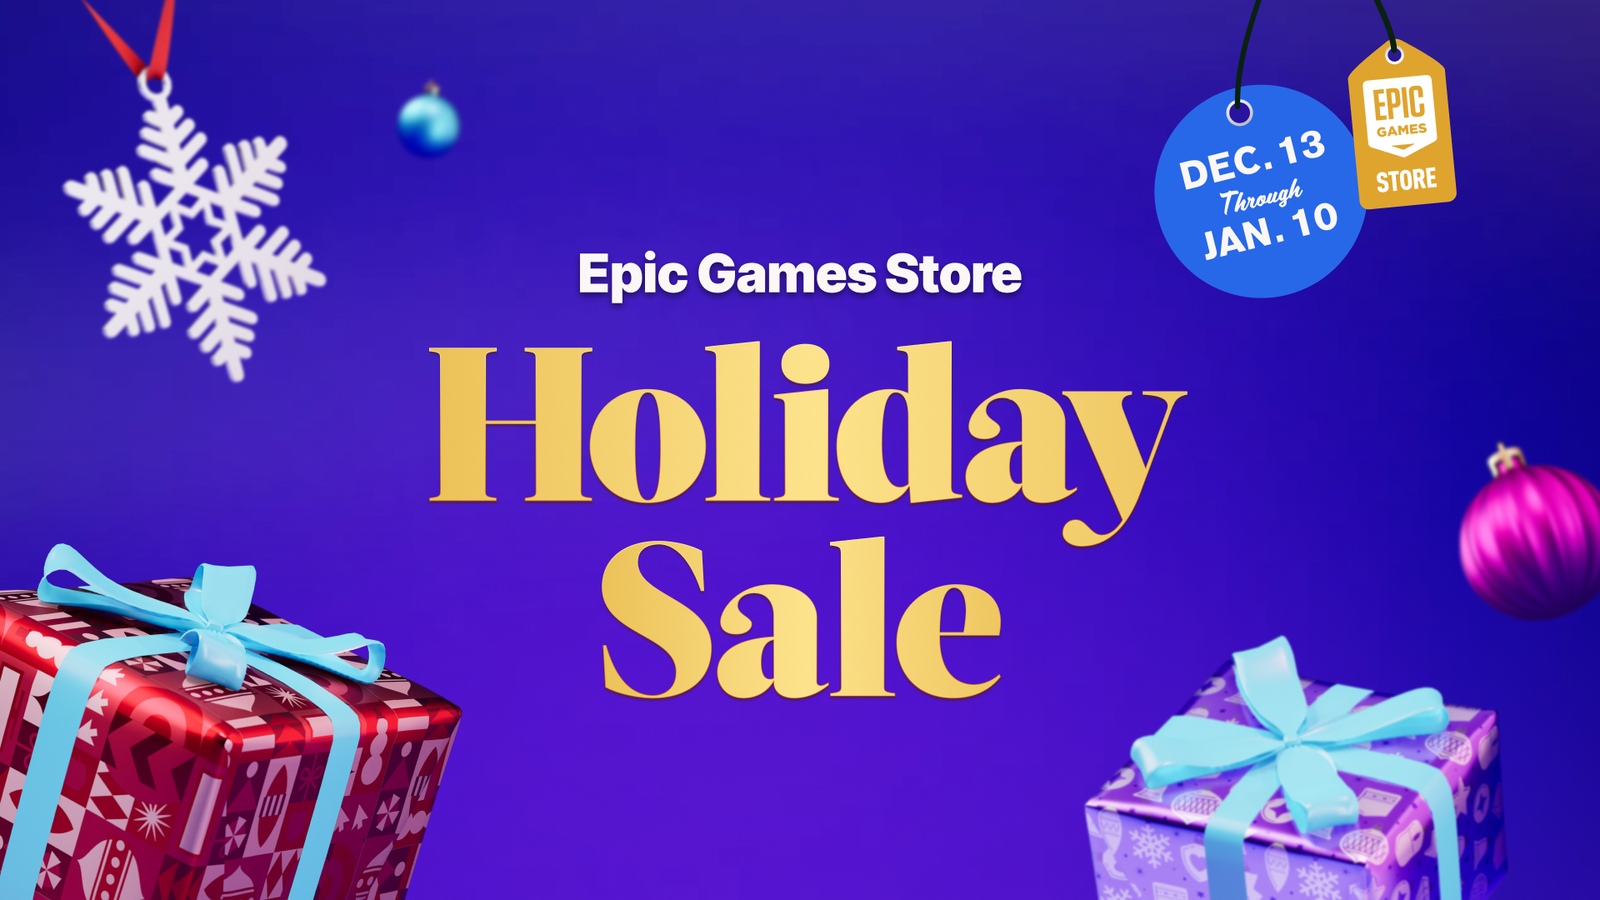 Into the Breach is the first free game of Epic Games Store's Holiday Sale